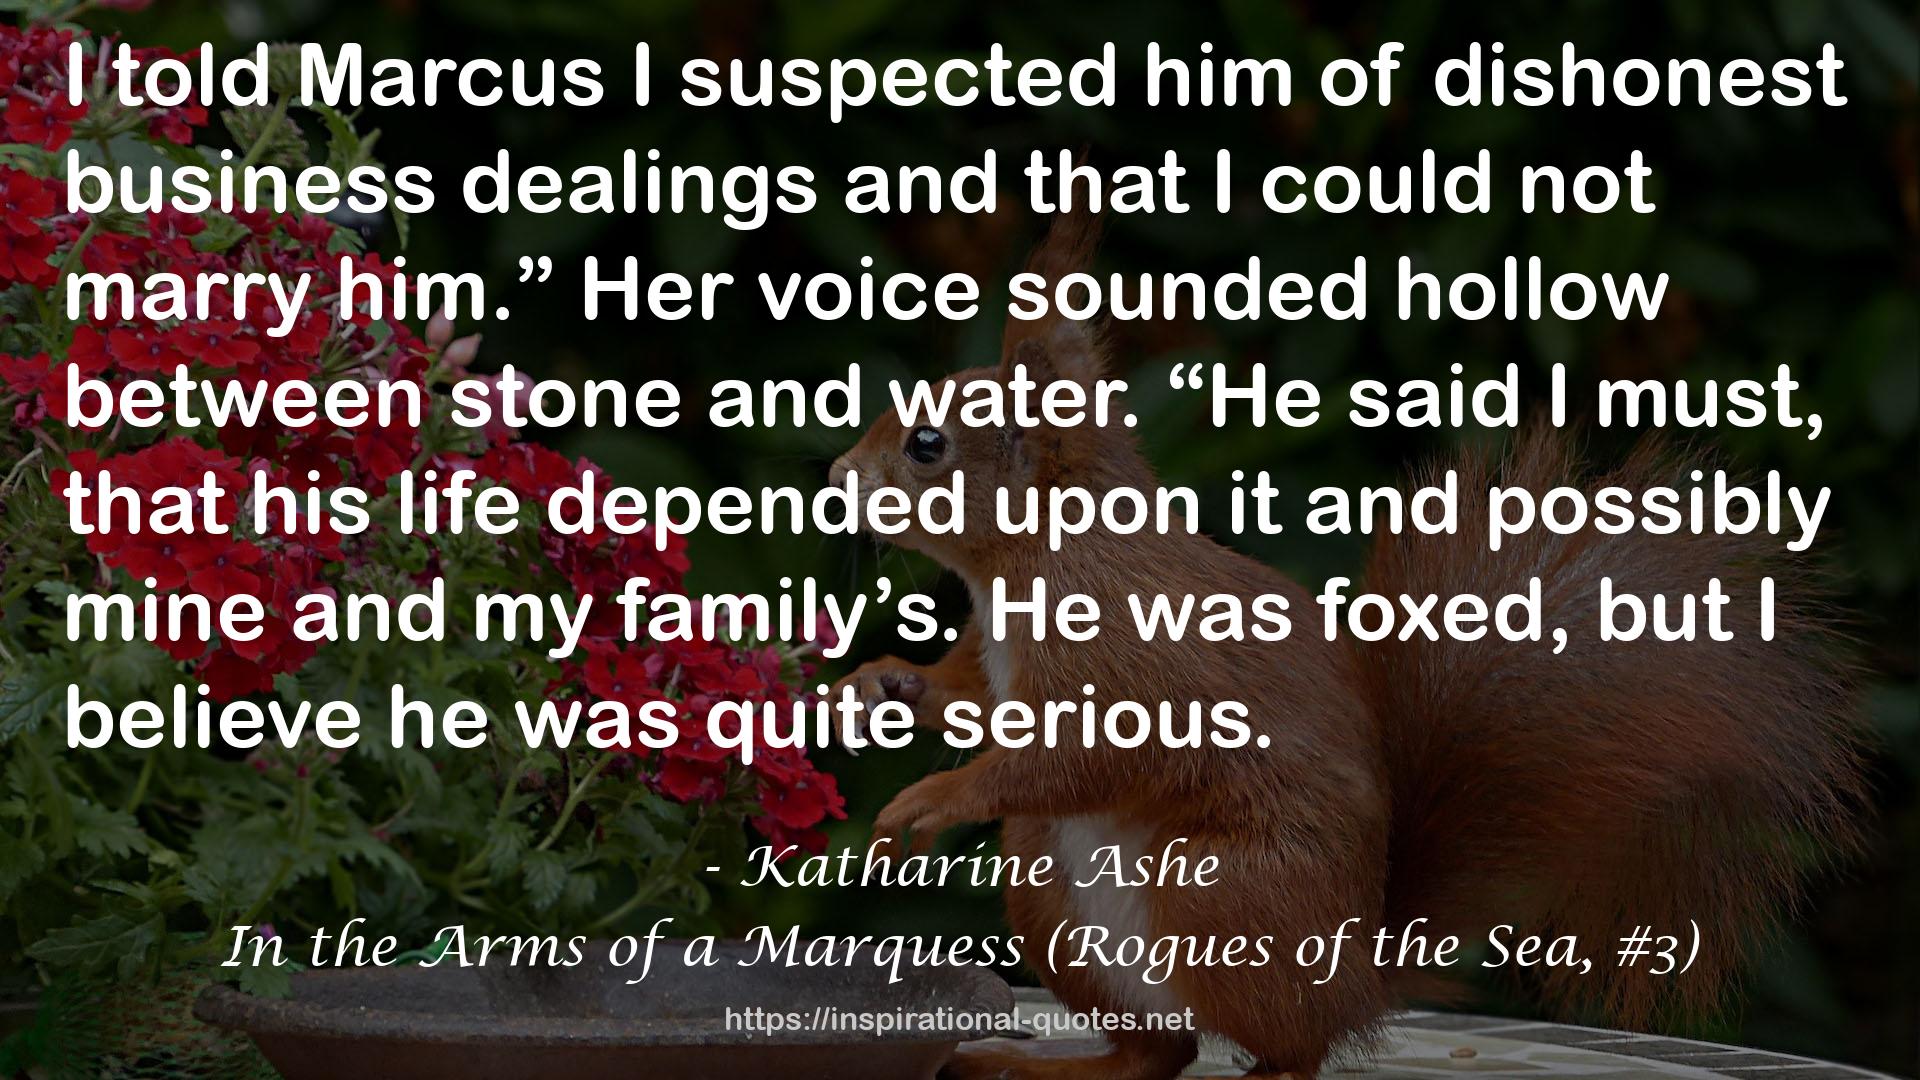 In the Arms of a Marquess (Rogues of the Sea, #3) QUOTES